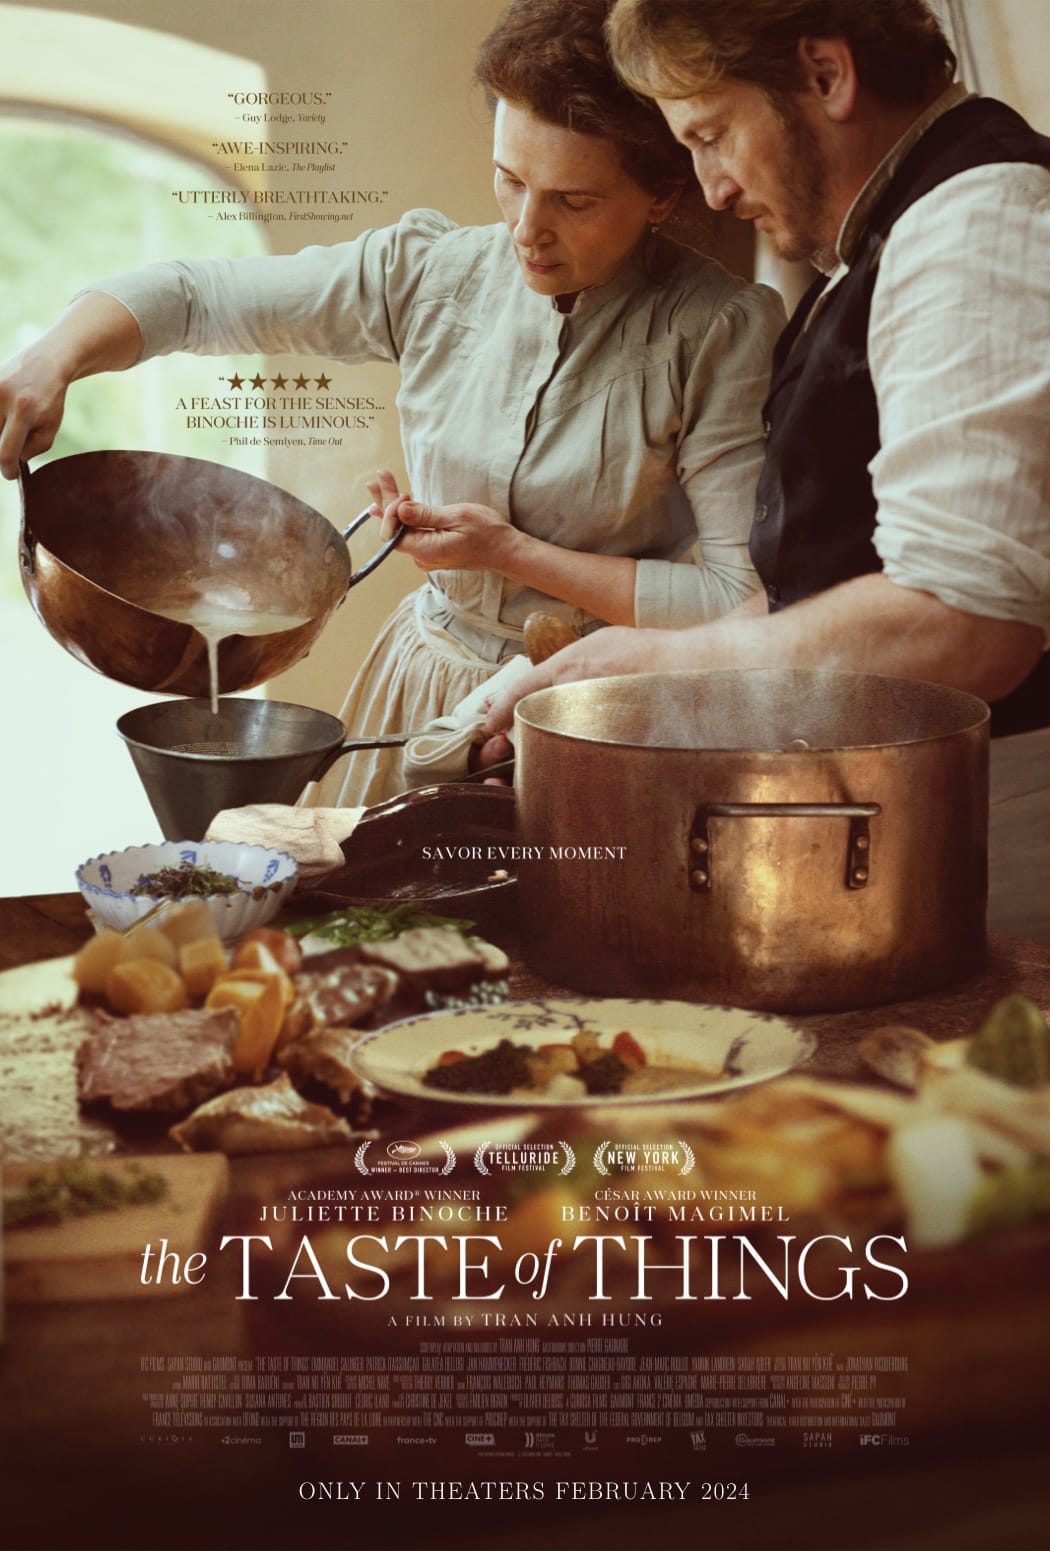 The Taste of Things (showing in our GRAND 750-seat HISTORIC auditorium)